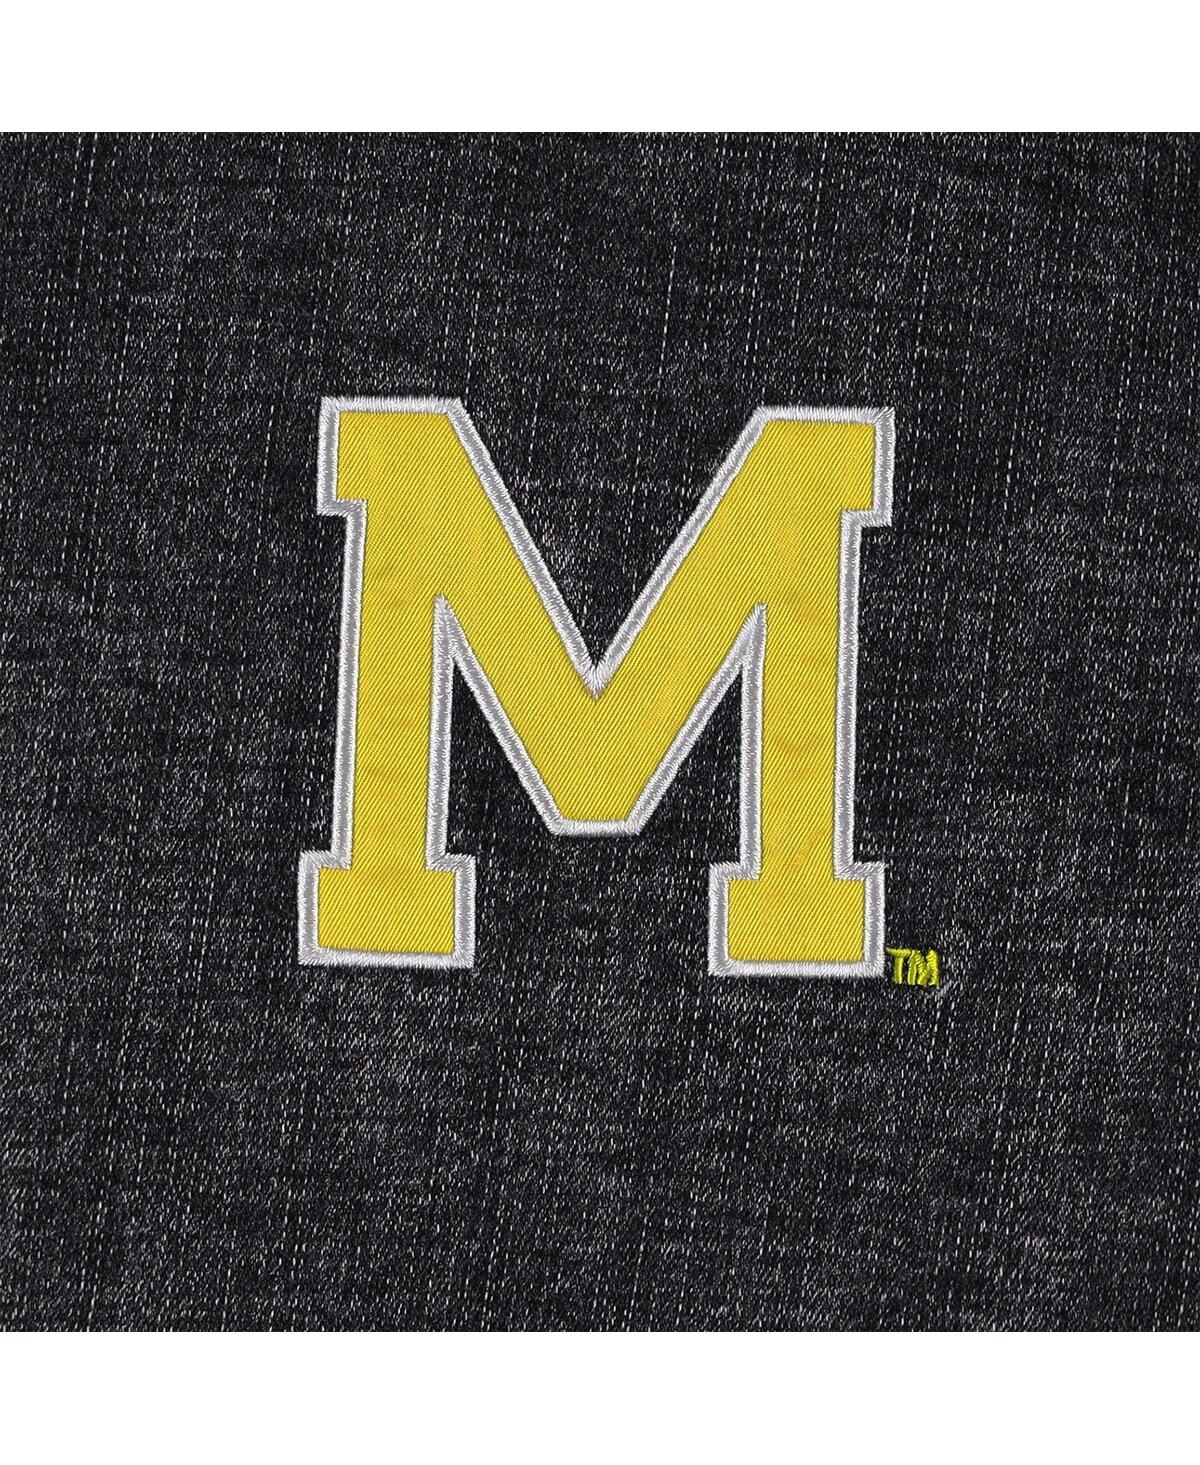 Shop Gameday Couture Women's  Charcoal Michigan Wolverines Multi-hit Tri-blend Oversized Button-up Denim J